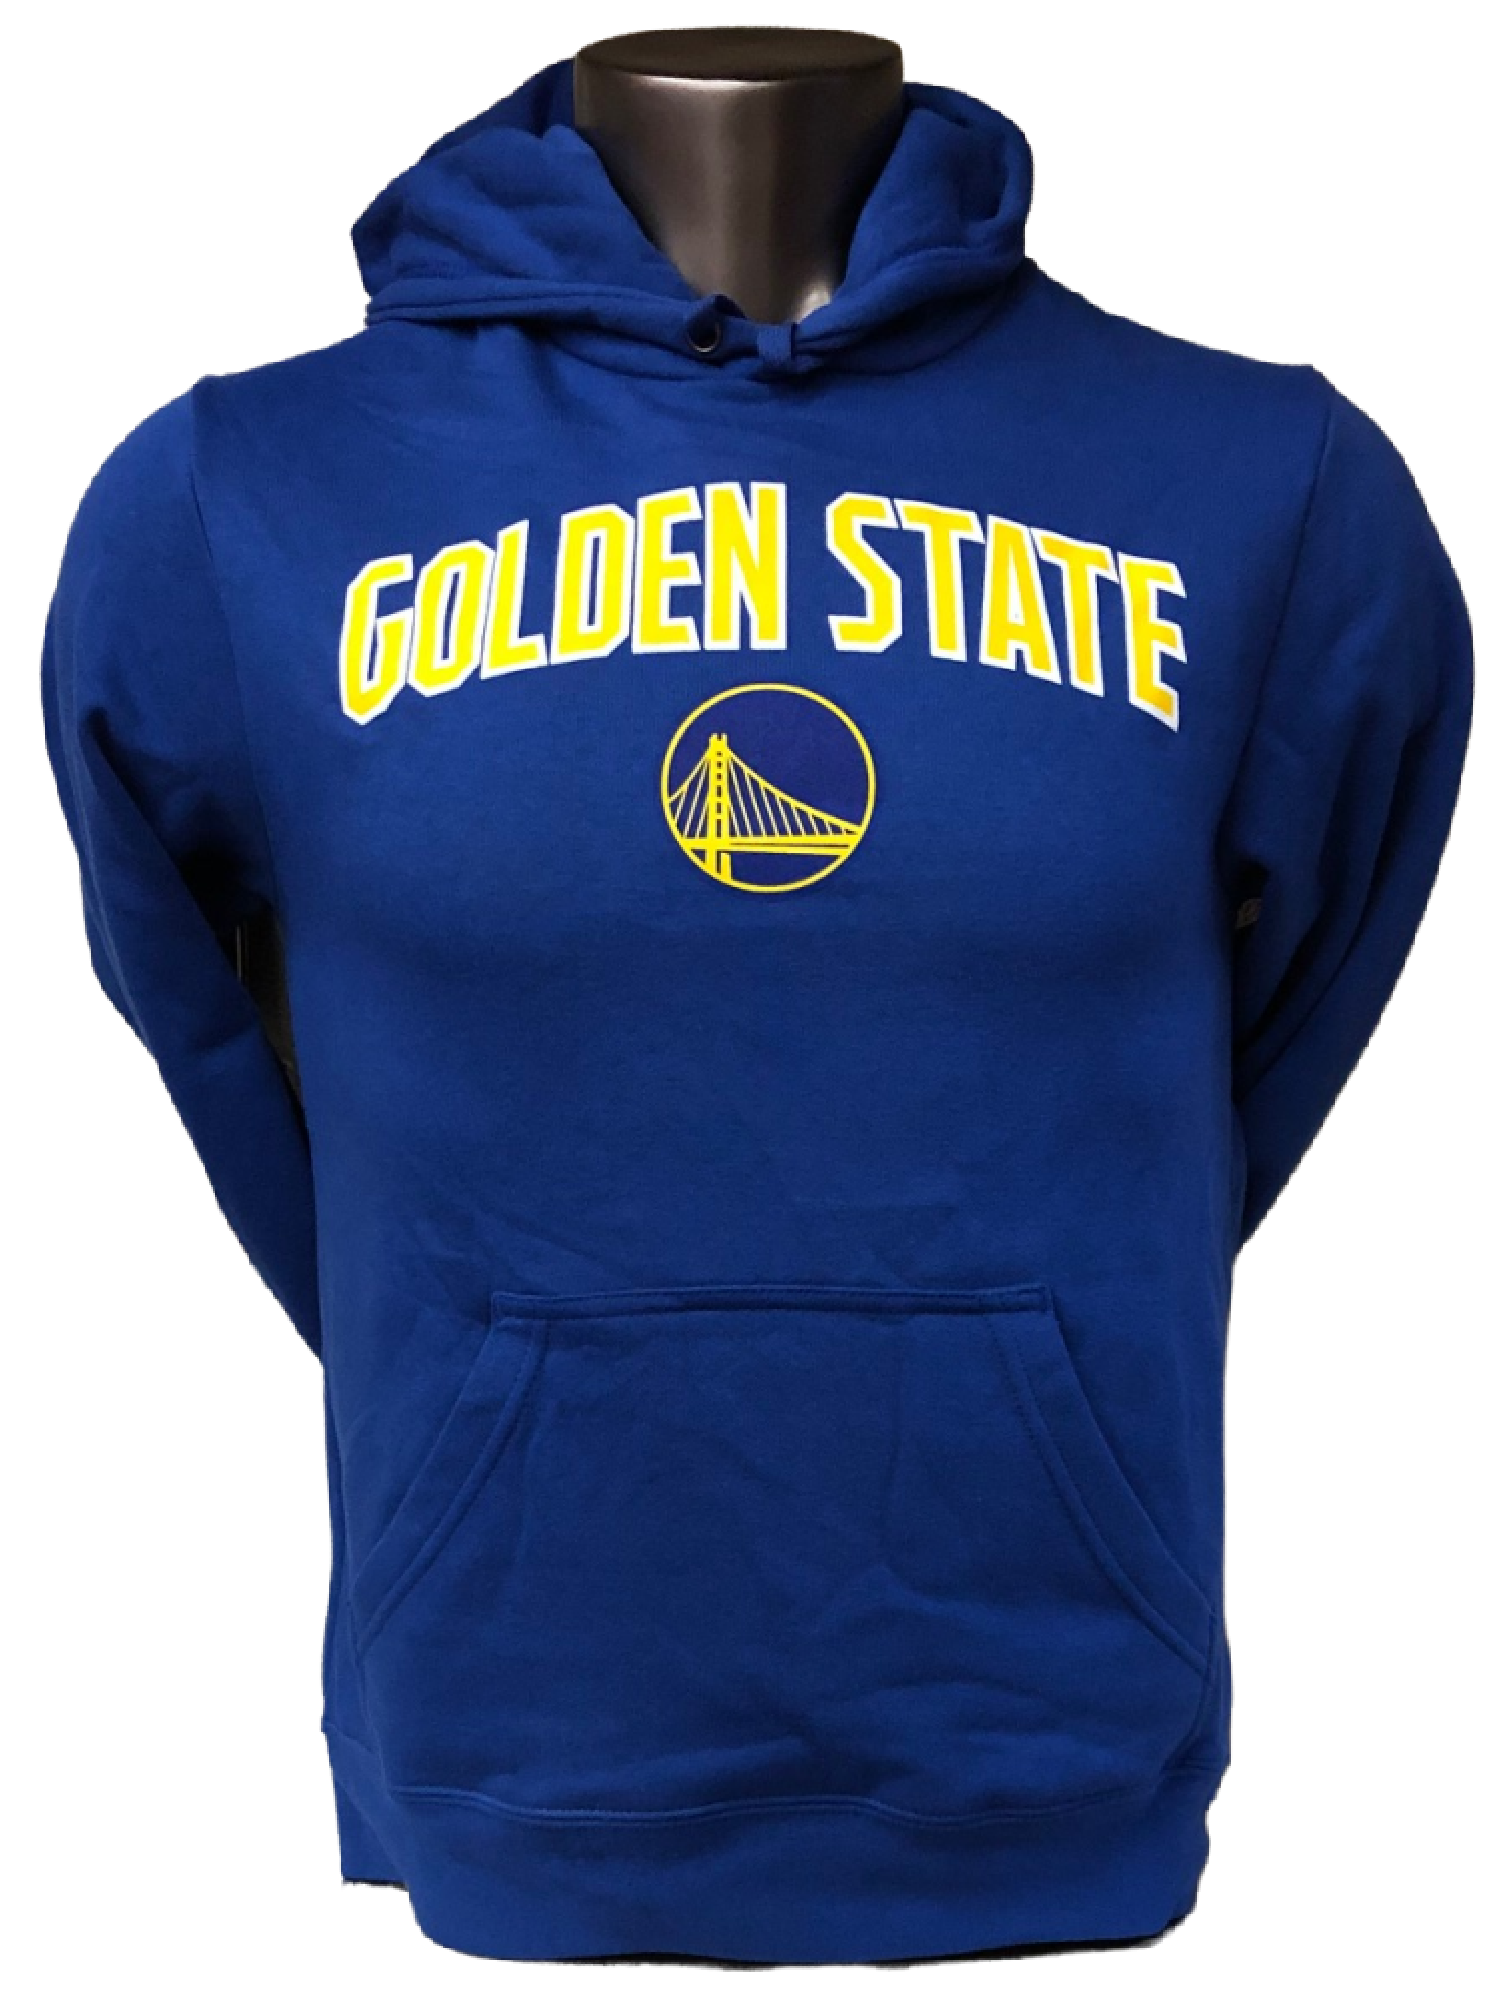 Golden State Warriors Fanatics Branded Victory Arch Pullover Hoodie - Royal